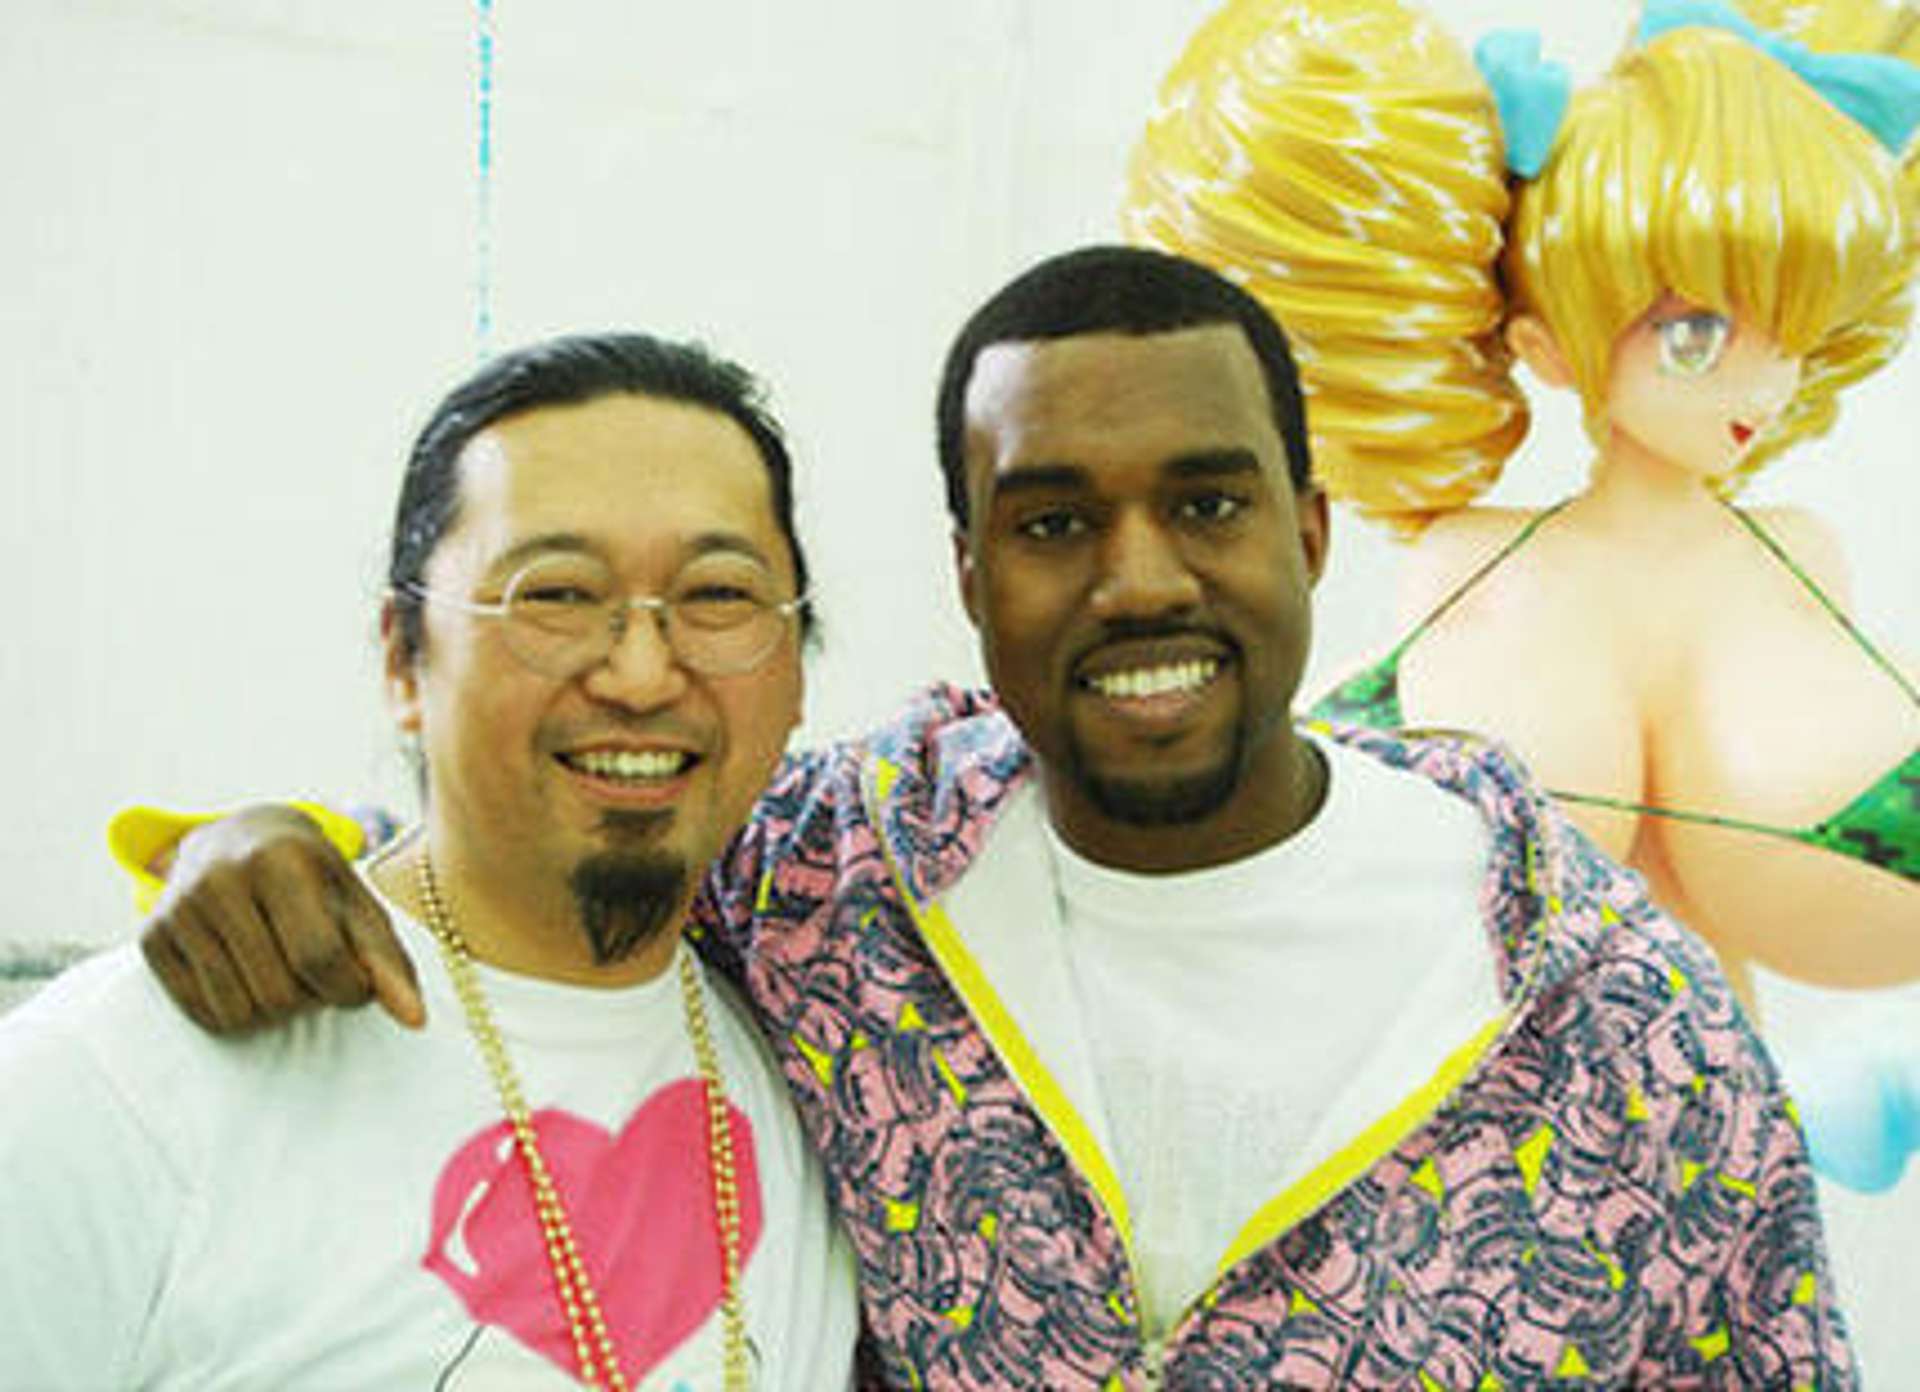 A photograph of artist Takashi Murakami and rapper Kanye West standing in front of Hiropon.